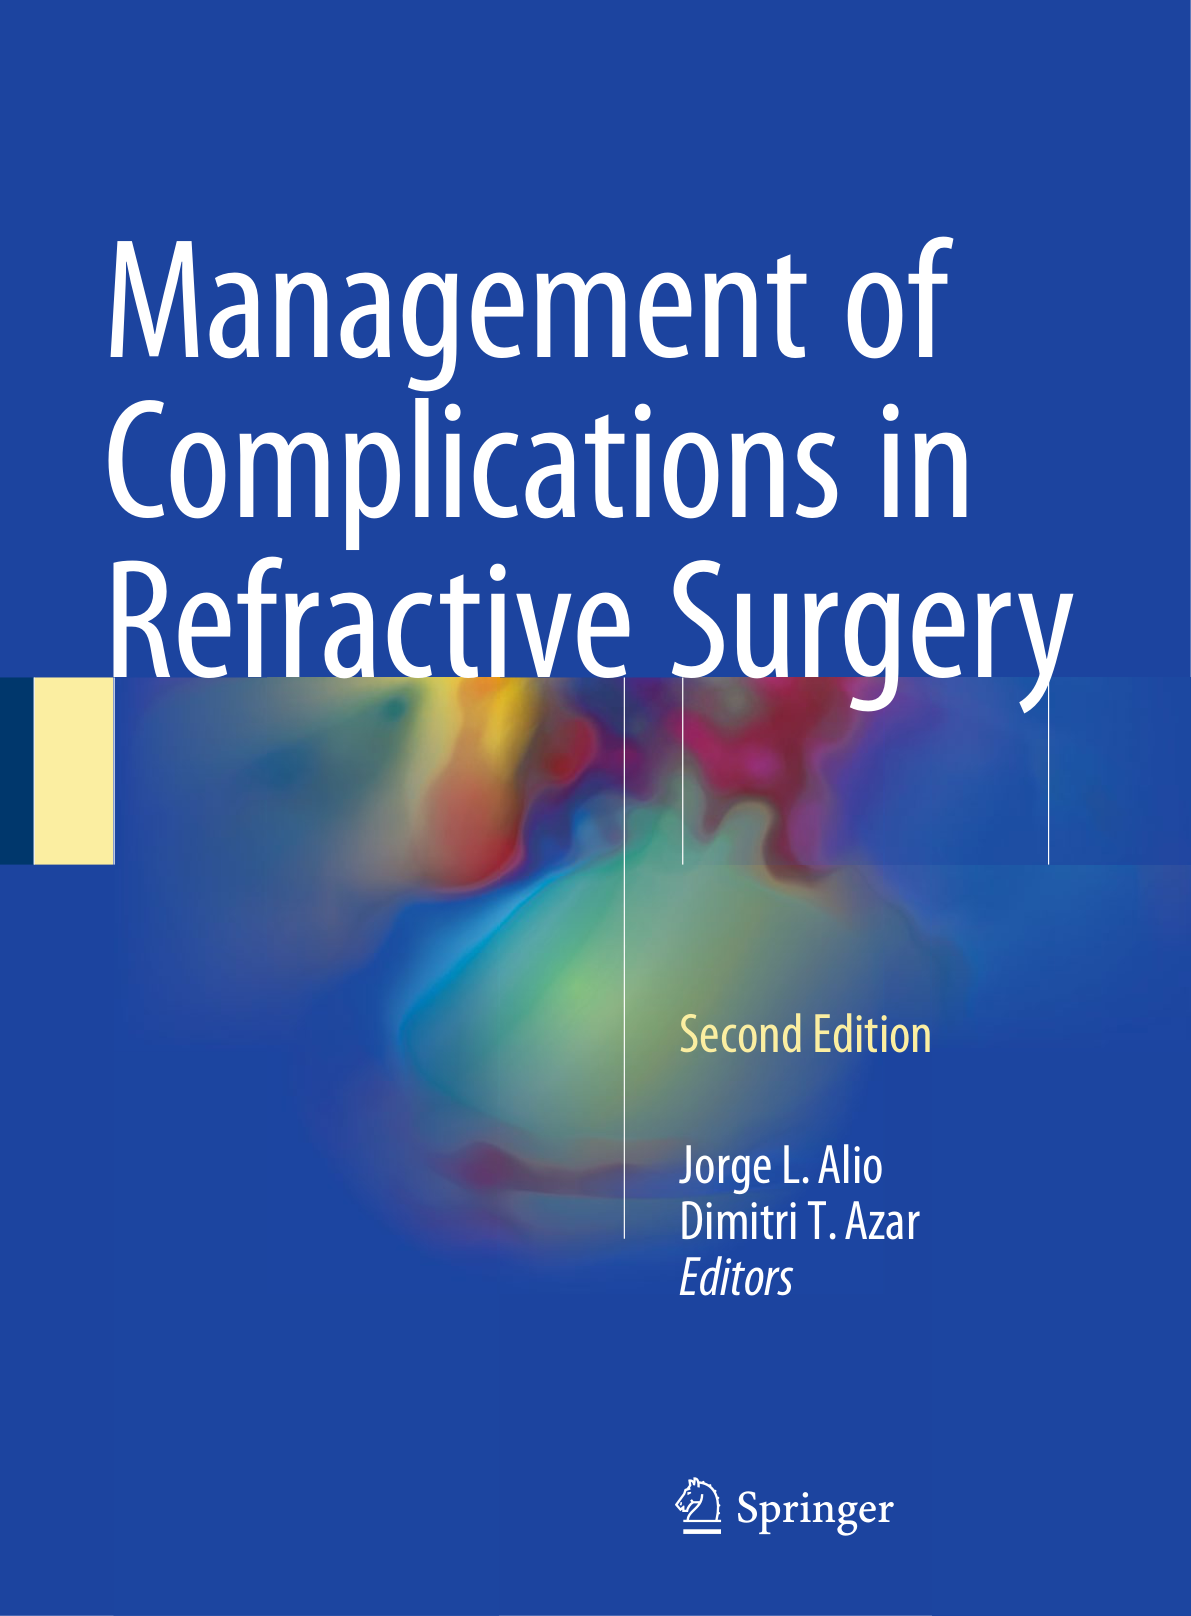 Management of Complications in Refractive Surgery.png